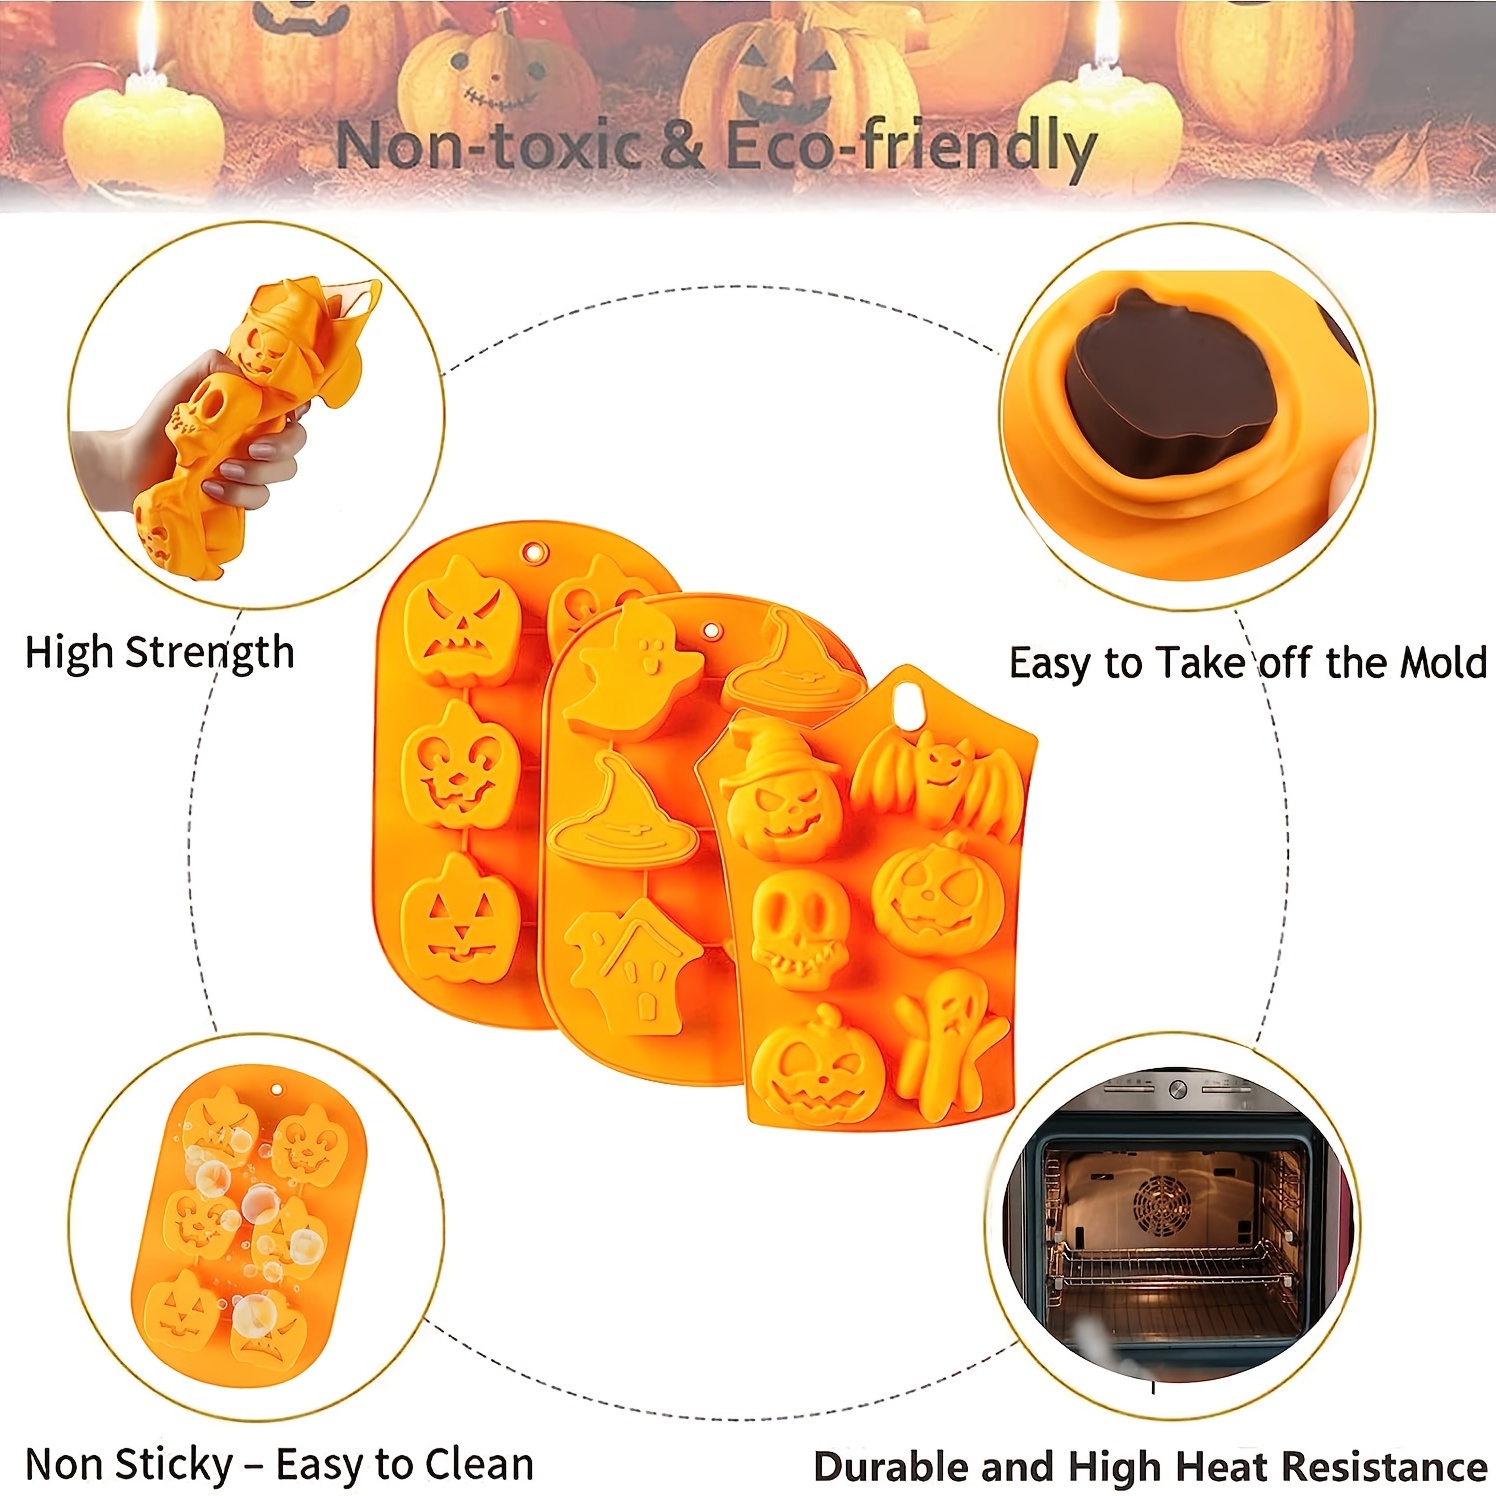  Creative 3D Skull Halloween Bakeware, 6 Grids Haunted Skull  Cakelet Pan, Non-Stick Handmade Soap Molds Chocolate Jelly Fondant Cake  Baking Mold Ice Cube Maker for Party Decor Gift: Home & Kitchen